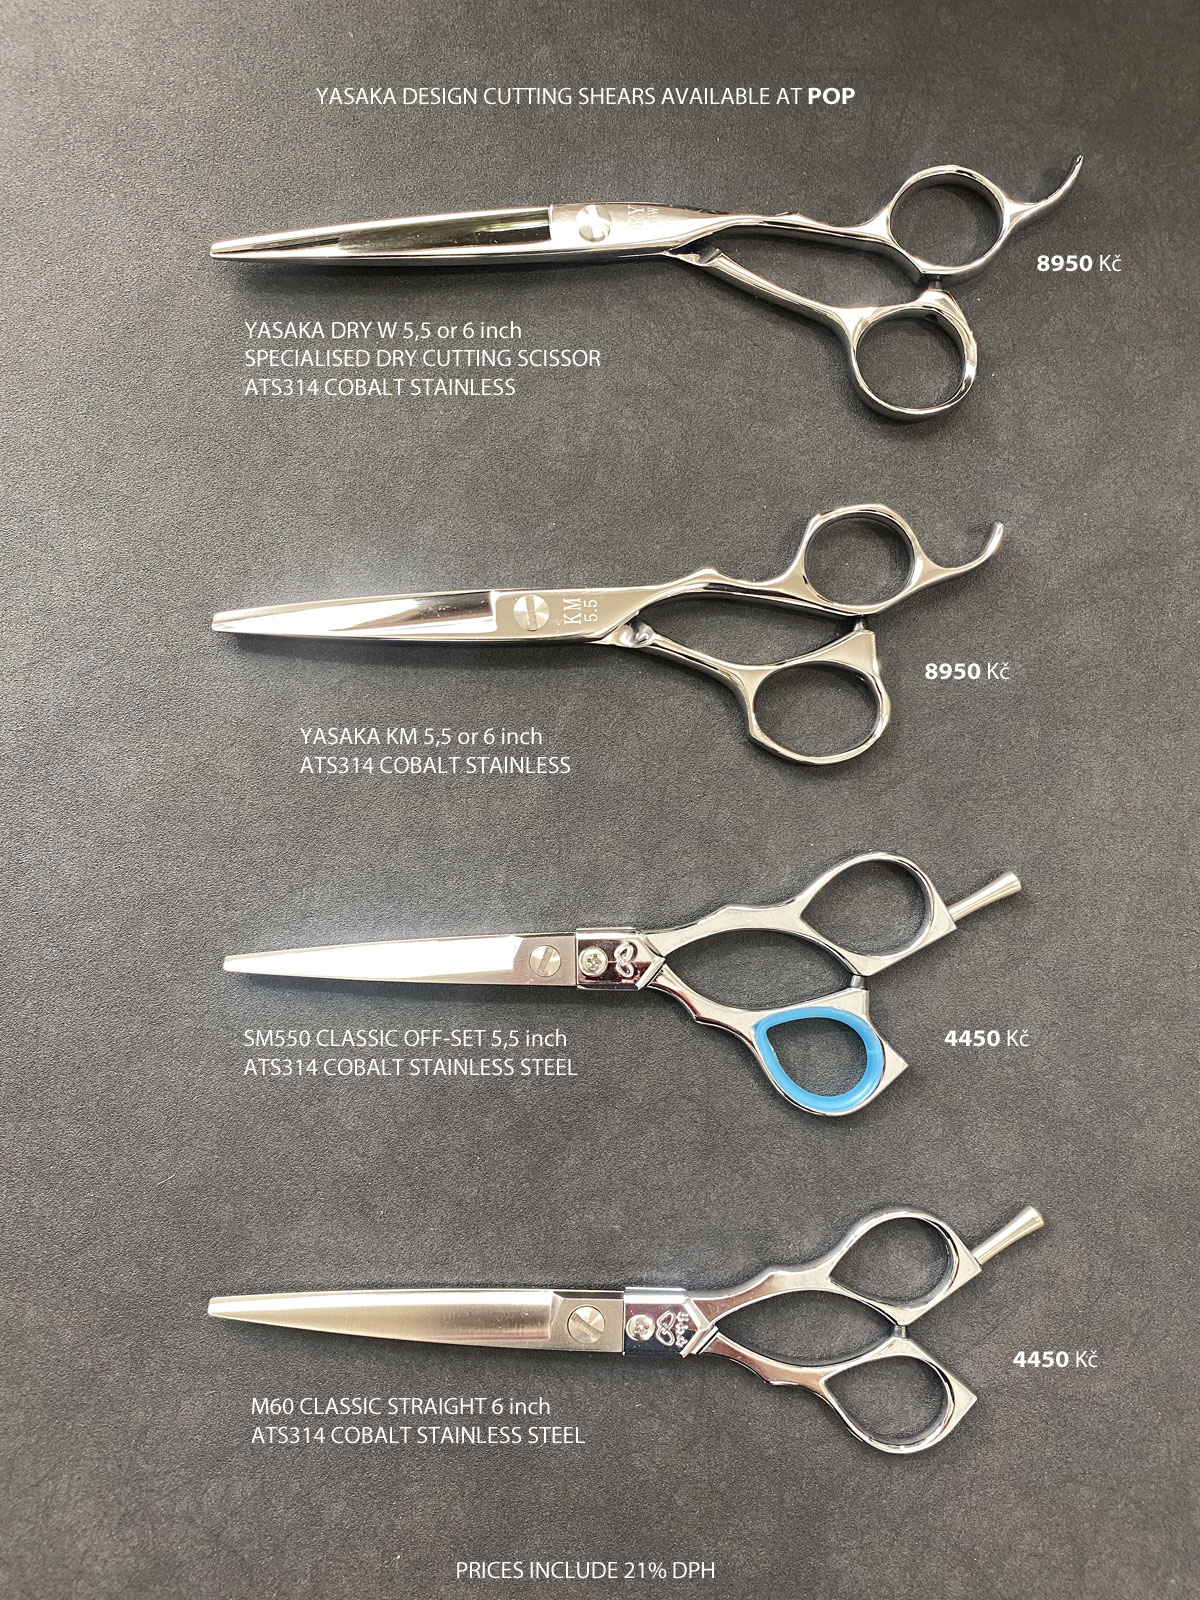 Prices for new Yasaka haircutting scissors